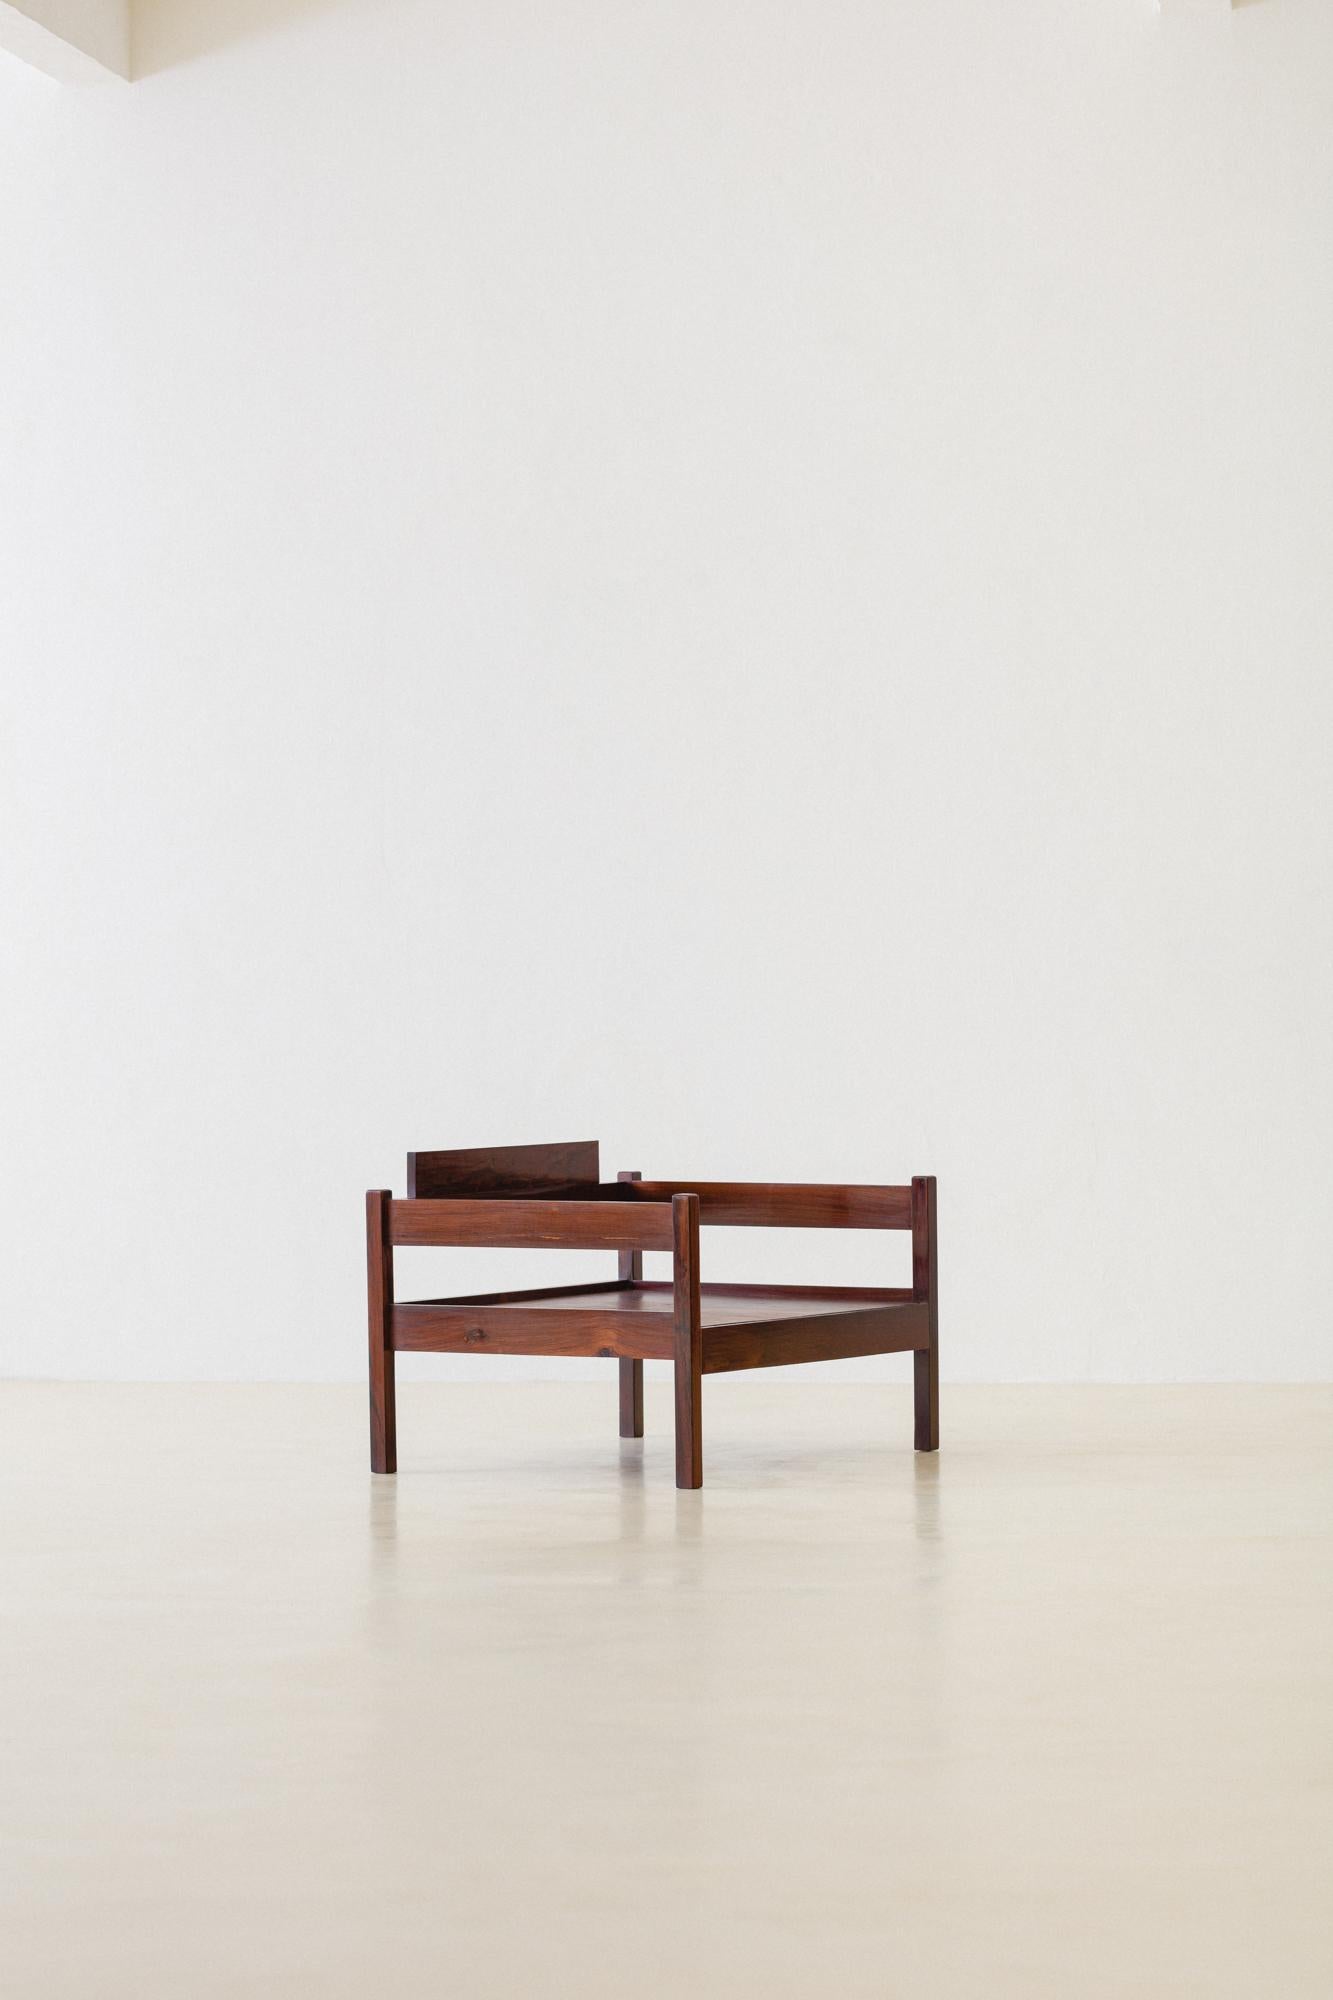 Pair of Brazilian Rosewood Armchairs with Ottomans by Celina Decorações, 1960s For Sale 6